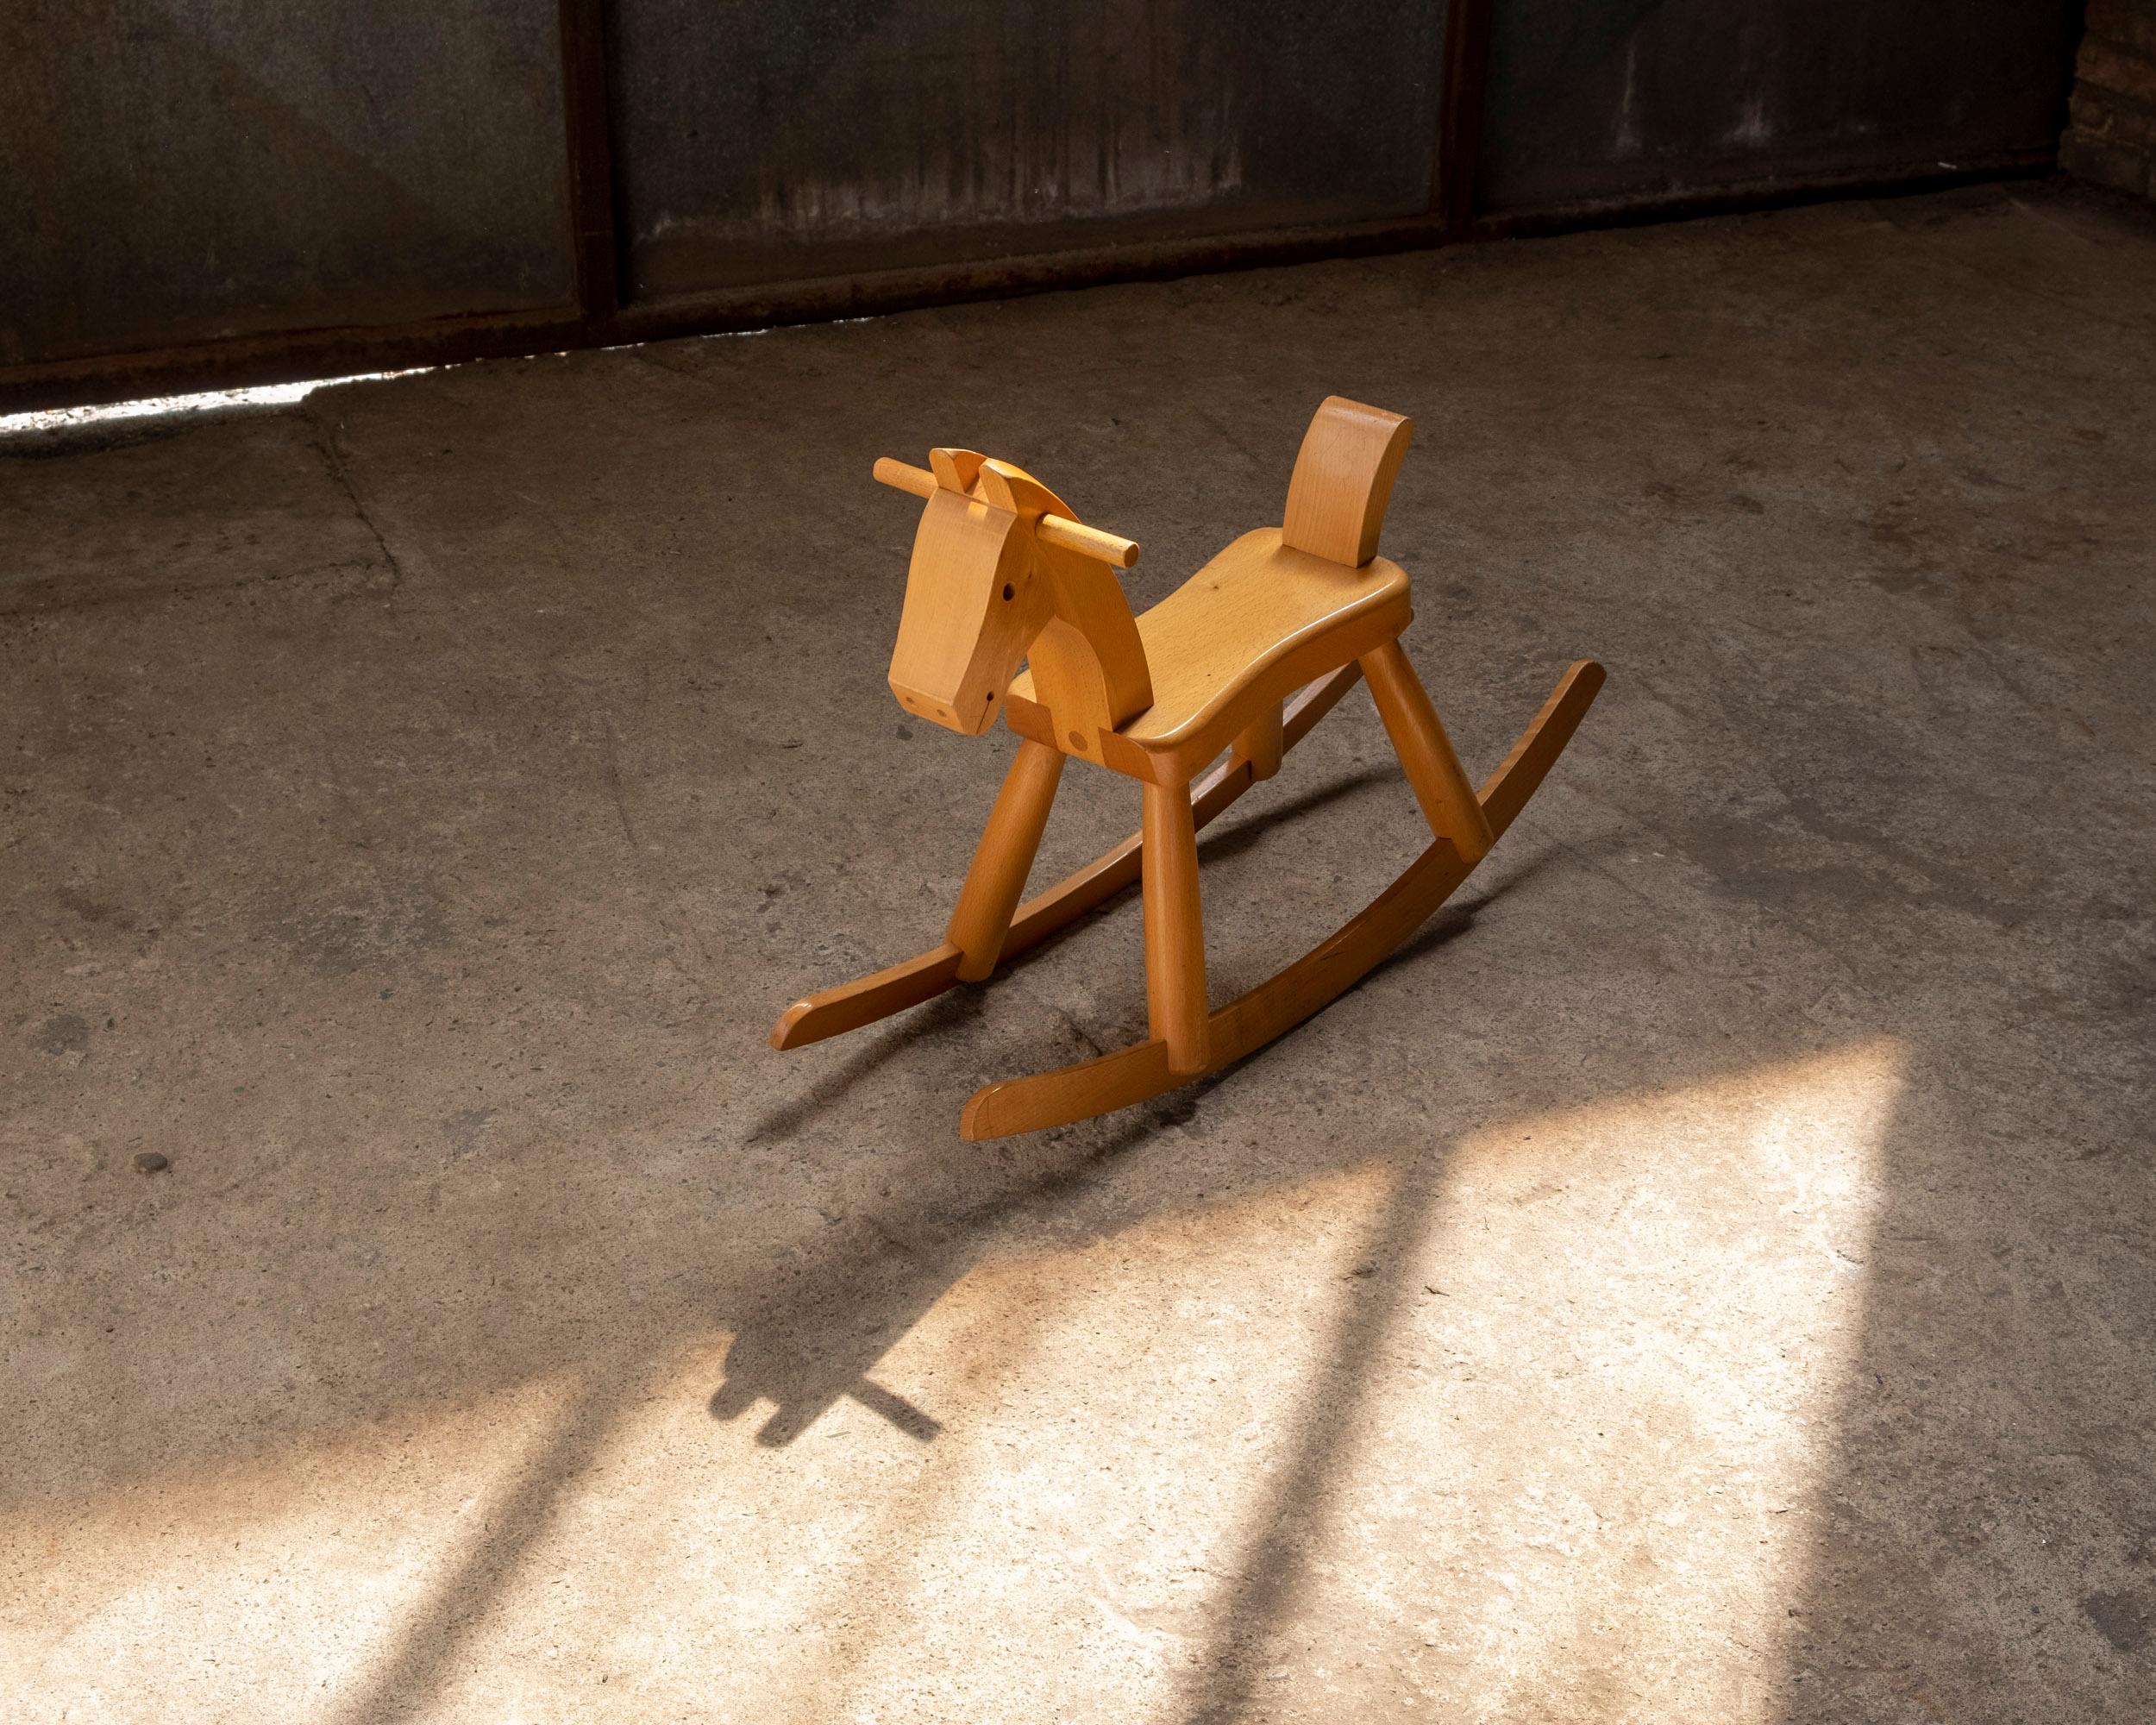 Vintage original Kay Bojesen rocking horse. Made from solid beech with a lacquered finish.
 Stamped on the underside Kay Bojesen, Denmark. Originally designed in 1936.
 
Measurements (HxWxD): 47cm x 24cm x 77cm, Seat height 26cm.

Light scratches